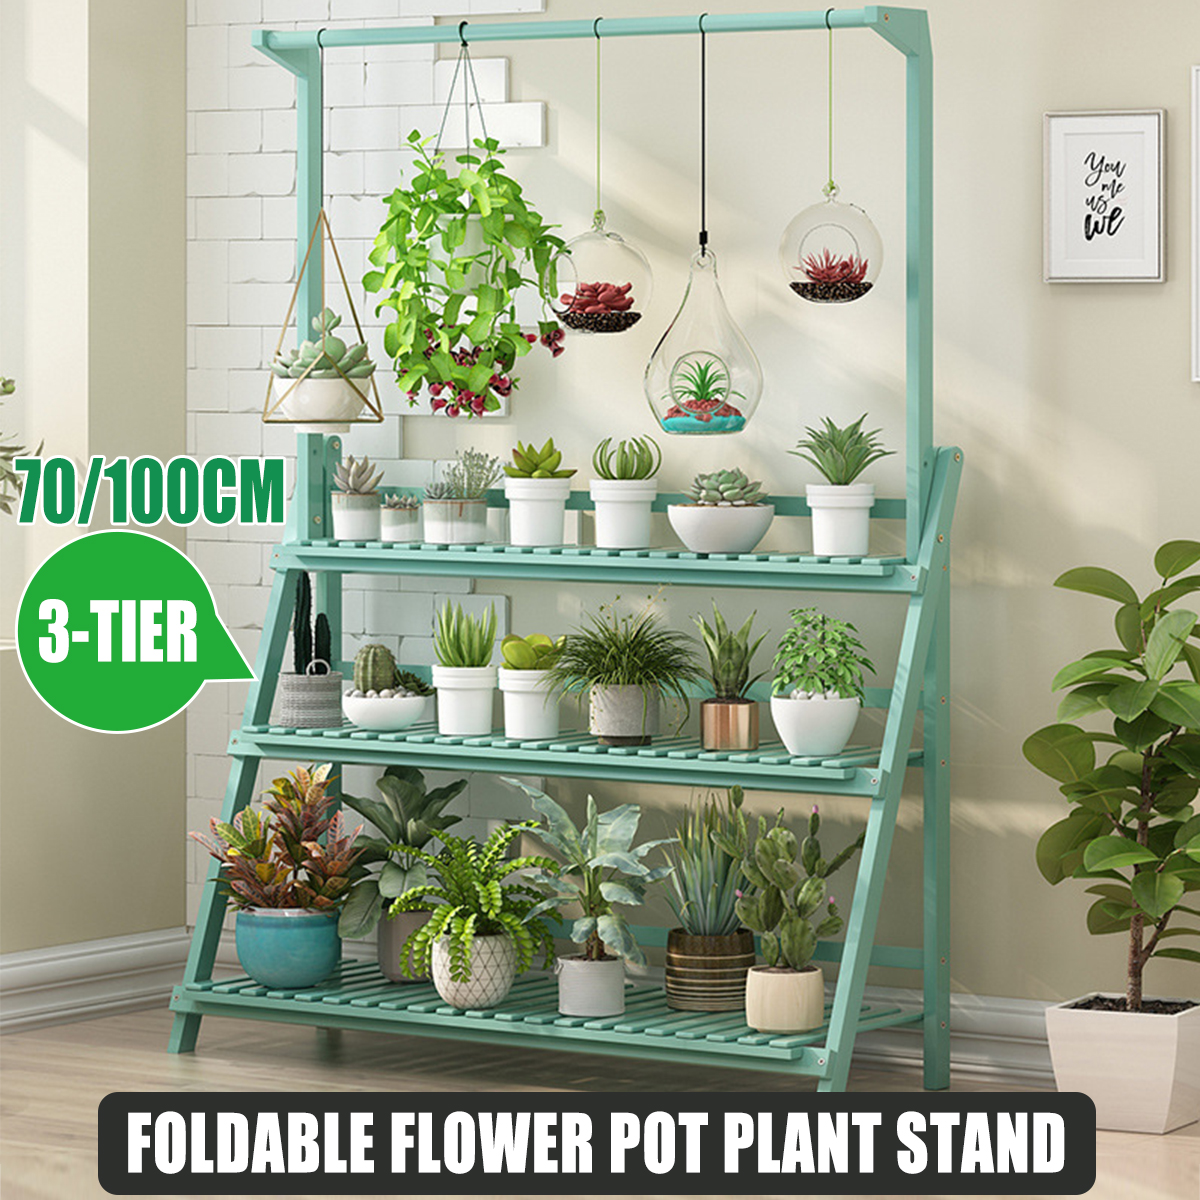 3-Tiers-Wood-Plant-Rack-Multi-layer-Flower-Pot-Stand-Wooden-Storage-Shelf-Display-Rack-Home-Office-G-1805397-1